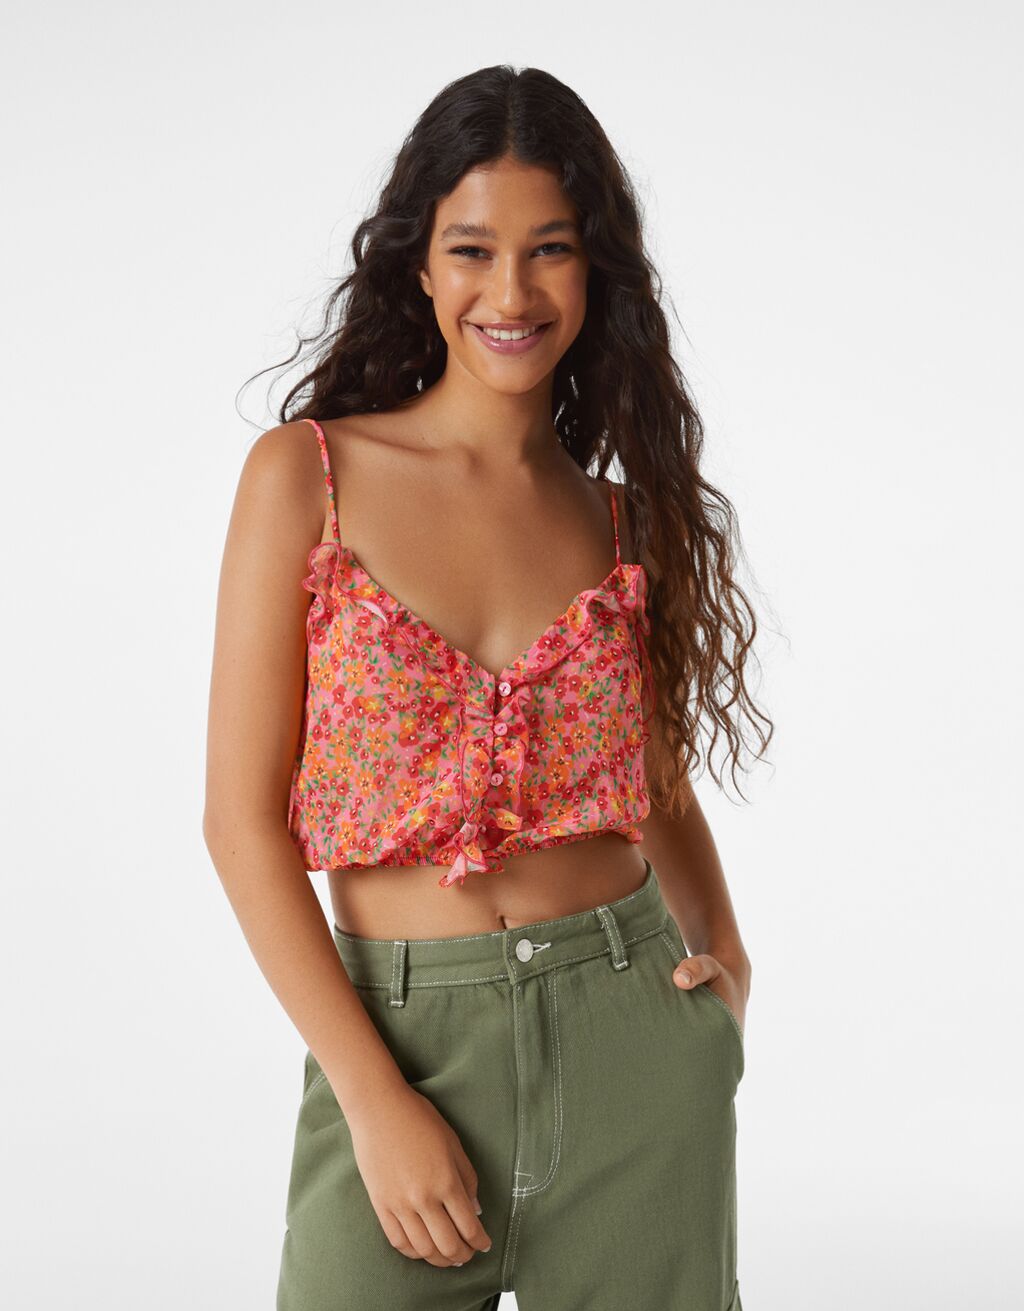 Floral print top with thin straps